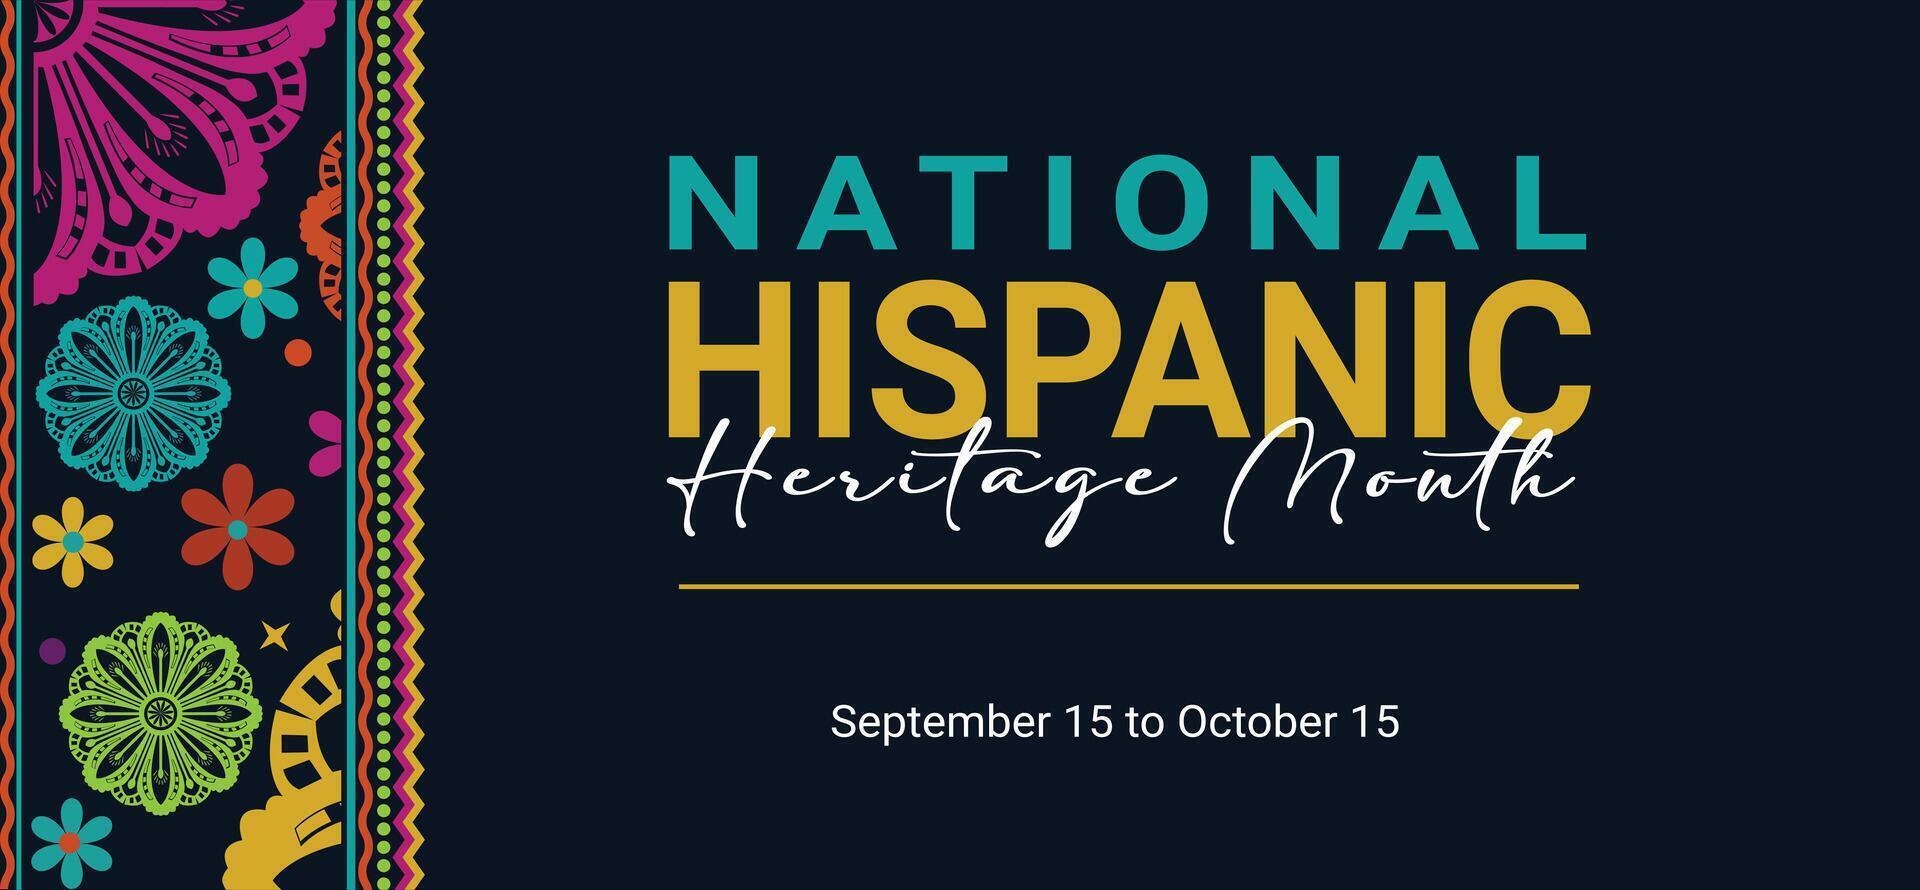 Hispanic heritage month web banner, poster card for social media, networks Greeting vector